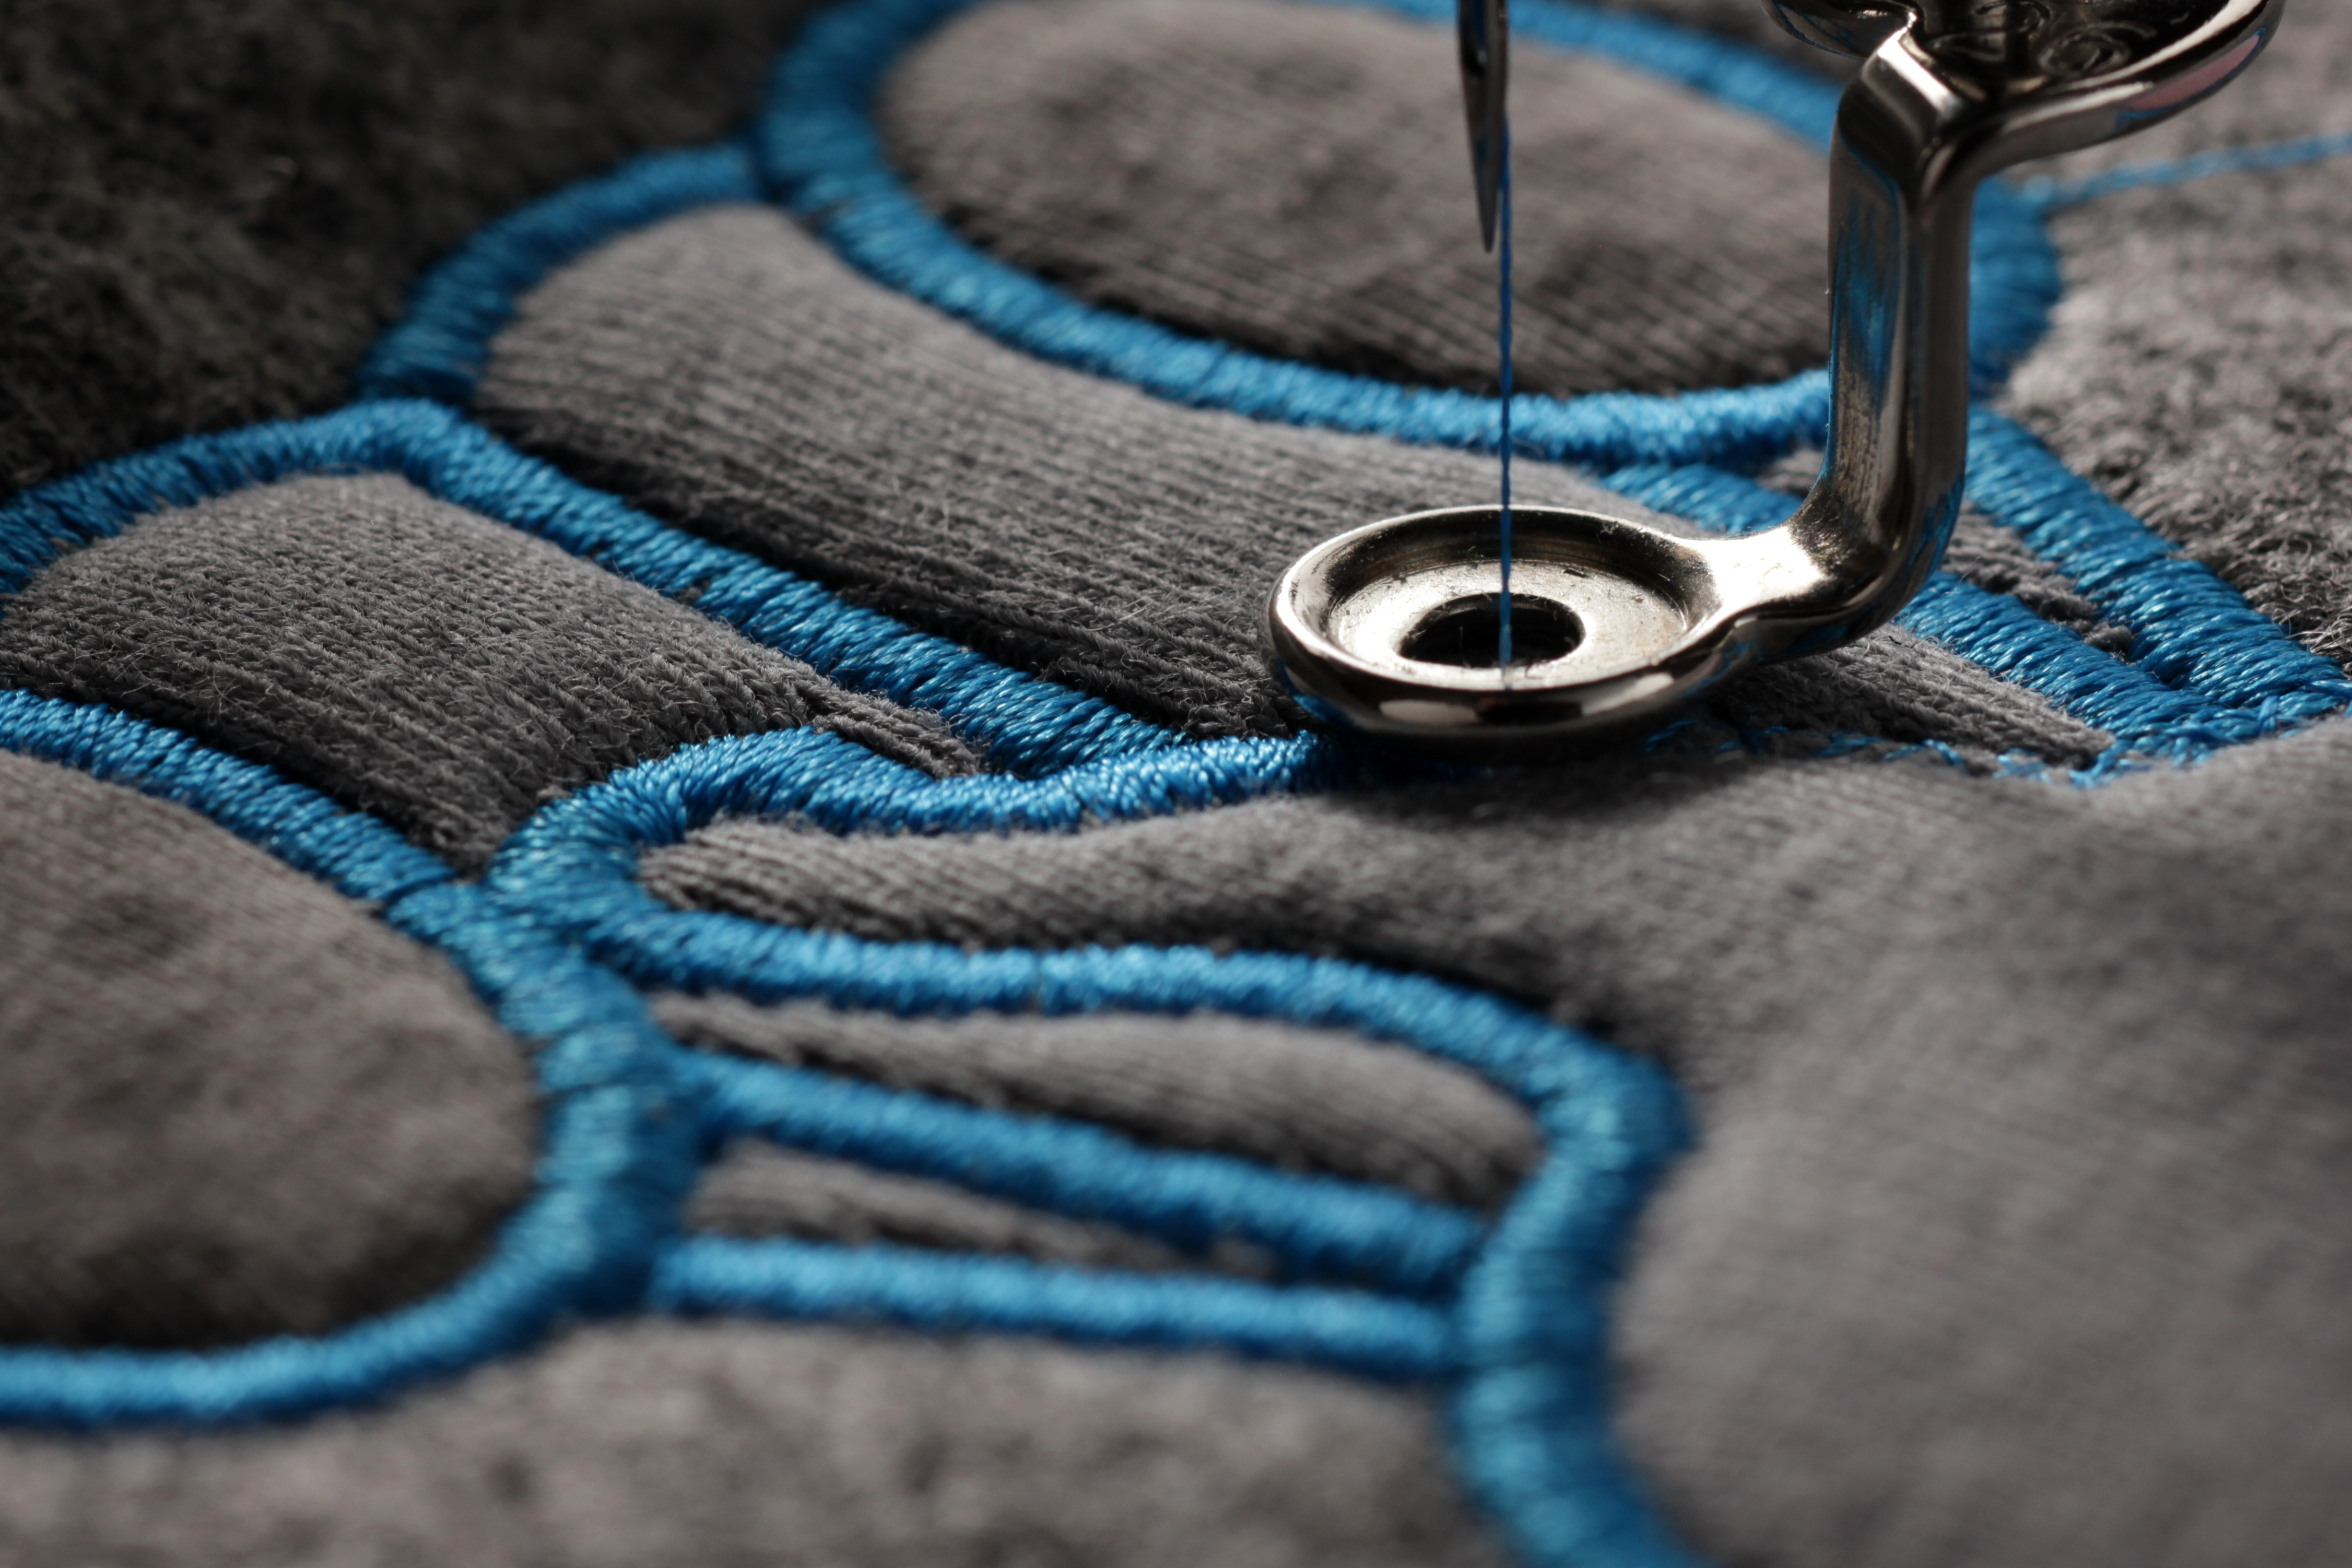 A sewing machine stitches a blue logo into a gray fabric